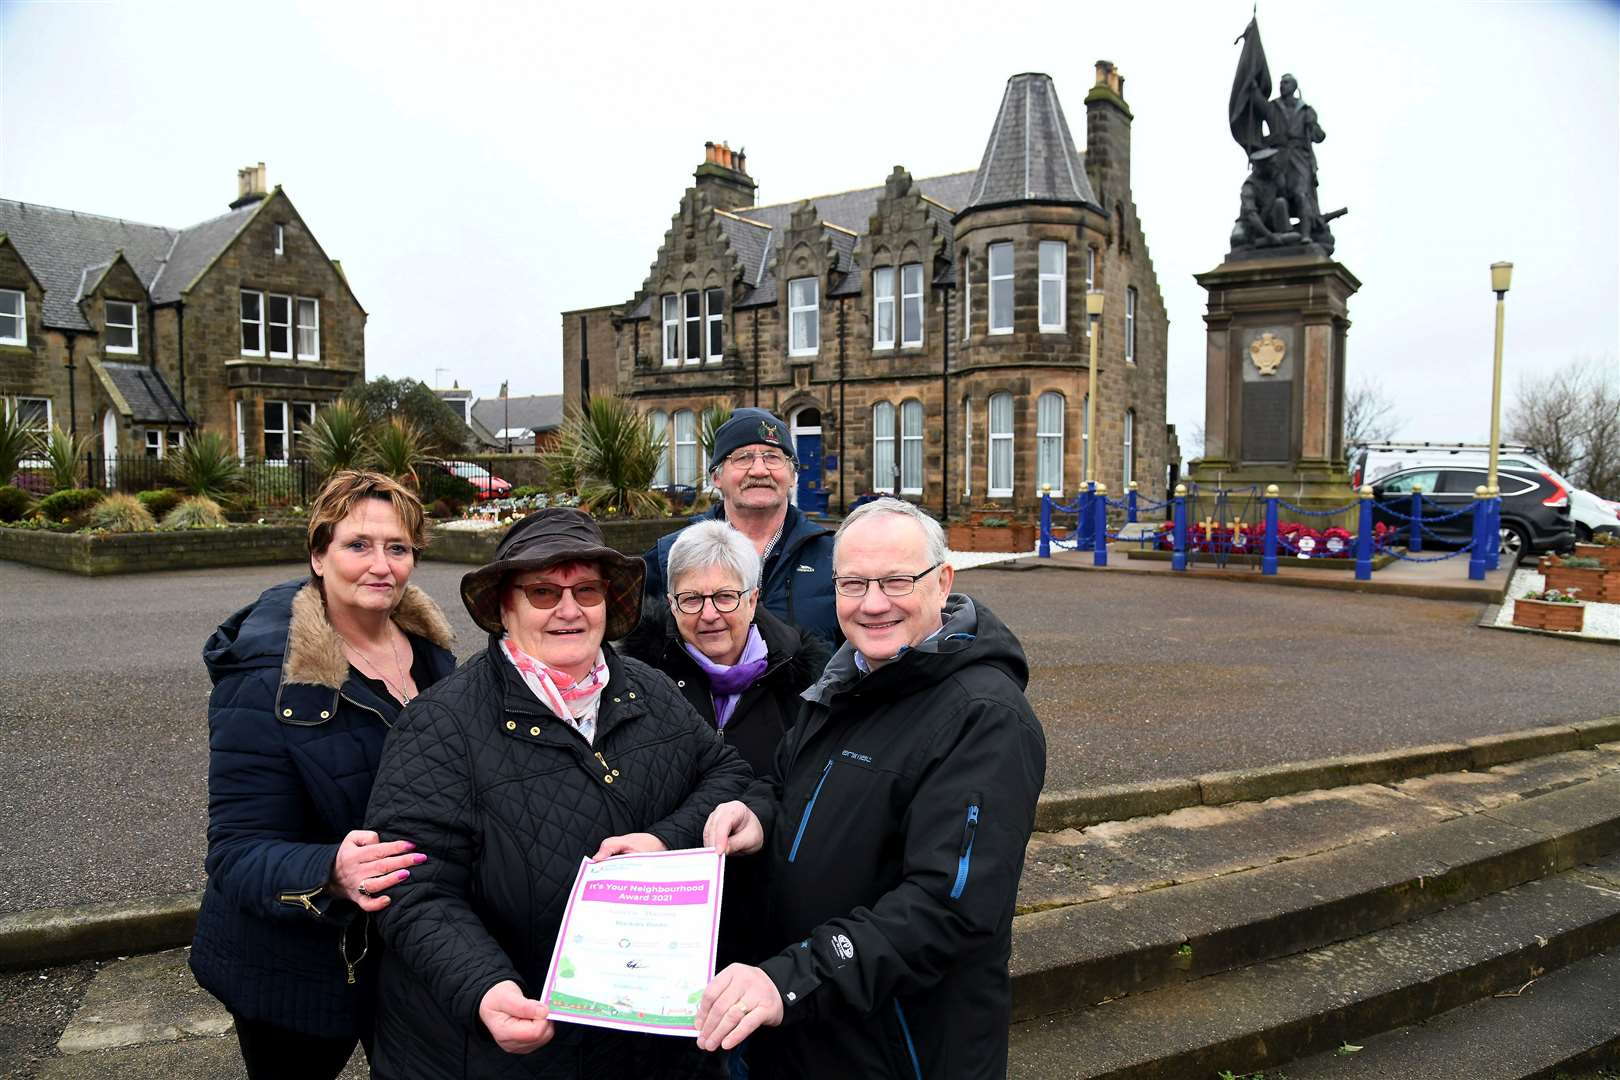 Buckie's Roots chairwoman Meg Jamieson and group member Gifford Leslie proudly show off the It's Your Neighbourhood award, joined by fellow group members (from left) Morag Stewart, Evelyn Flett and Archie Jamieson. Picture: Becky Saunderson